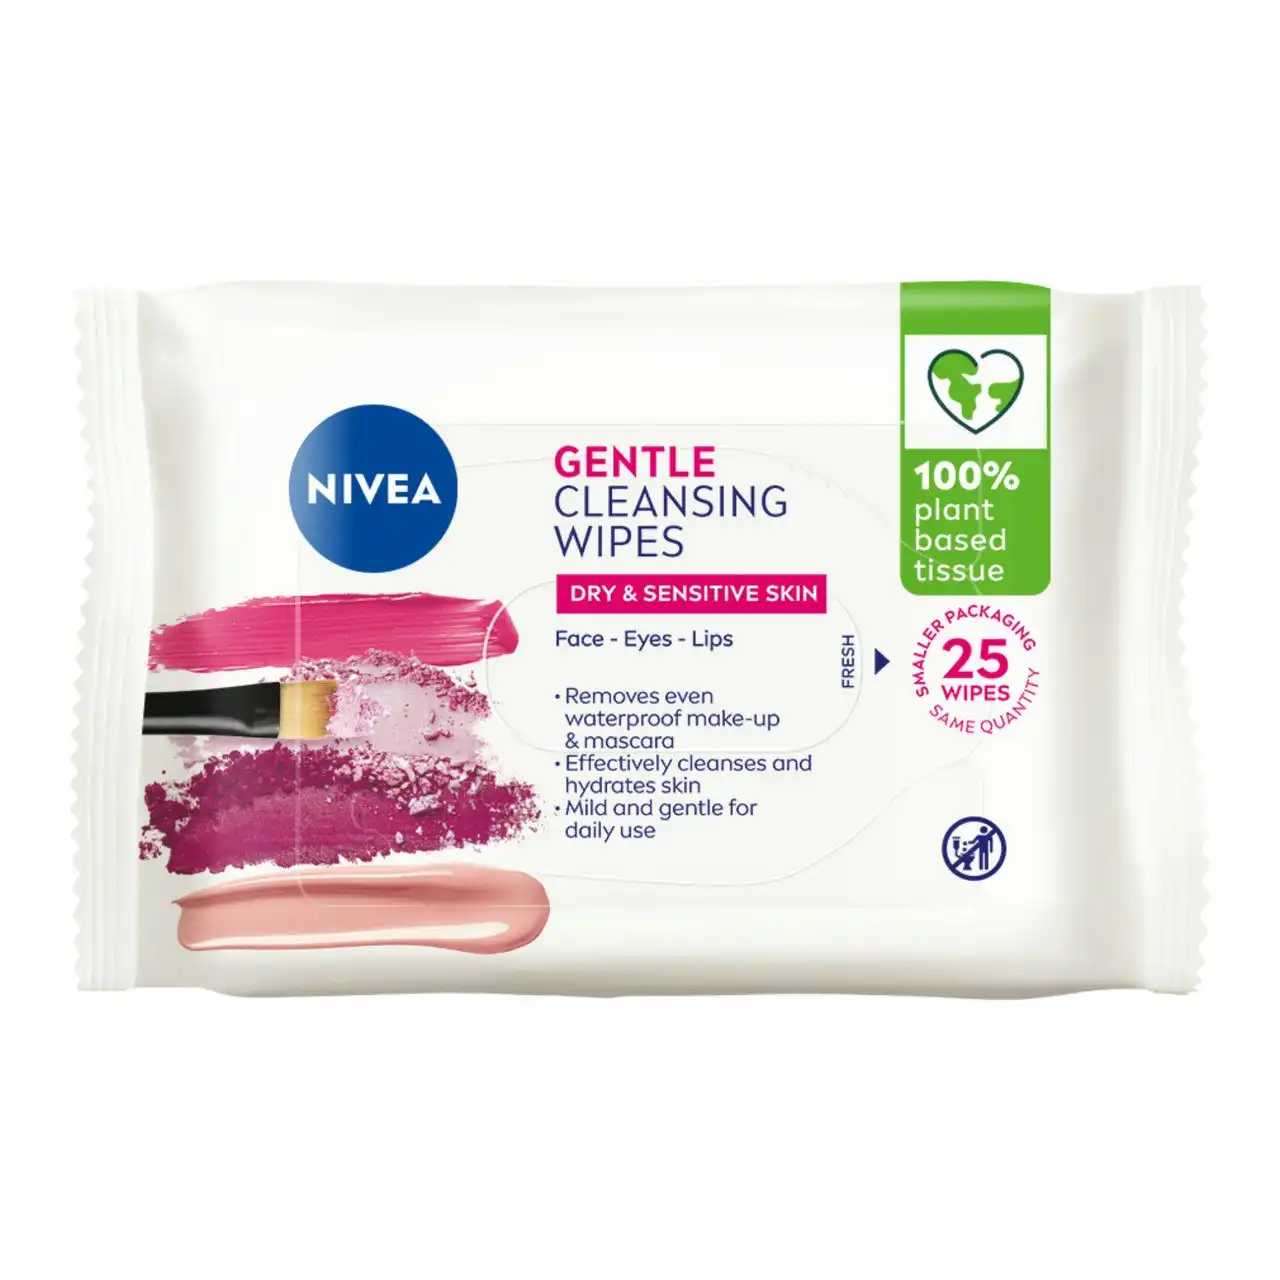 Nivea Gentle Biodegradable Cleansing Wipes for Dry & Sensitive Skin 25 pack